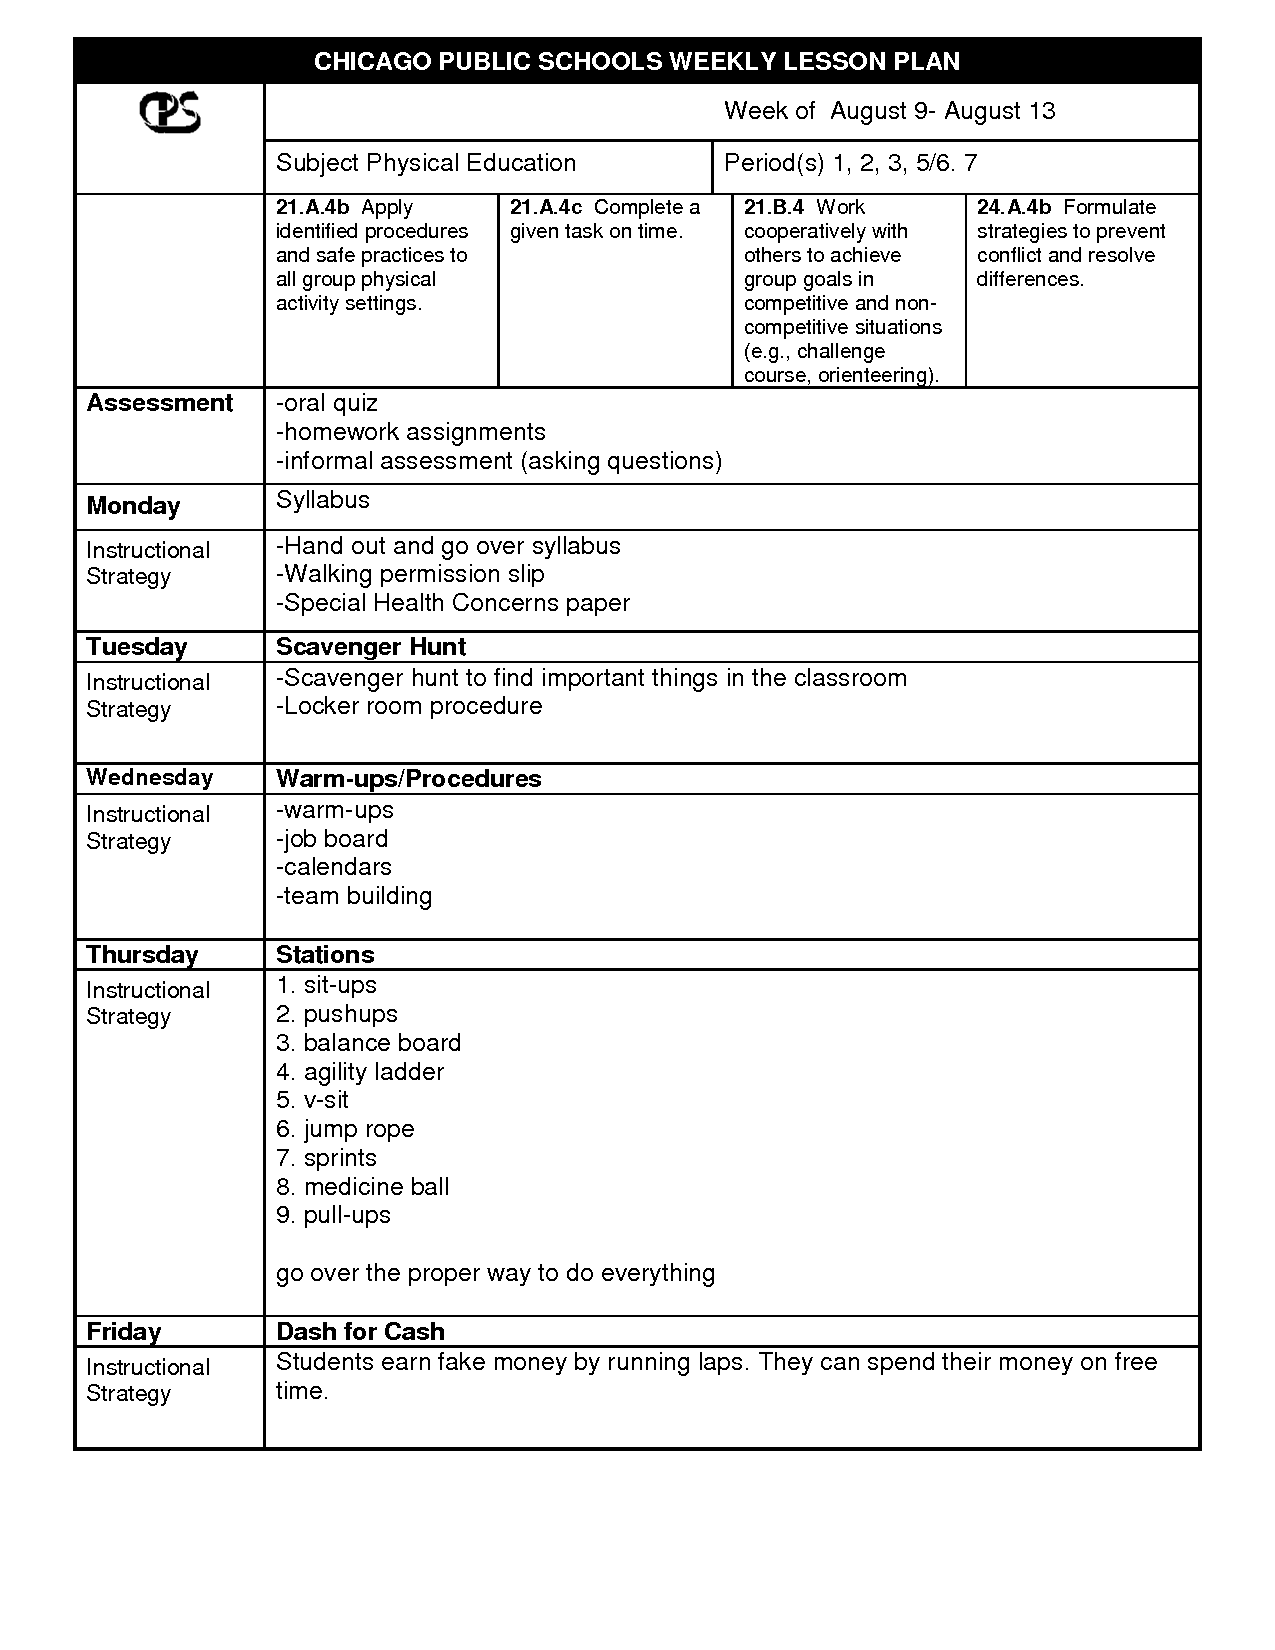 Physical Education Lesson Plans Image